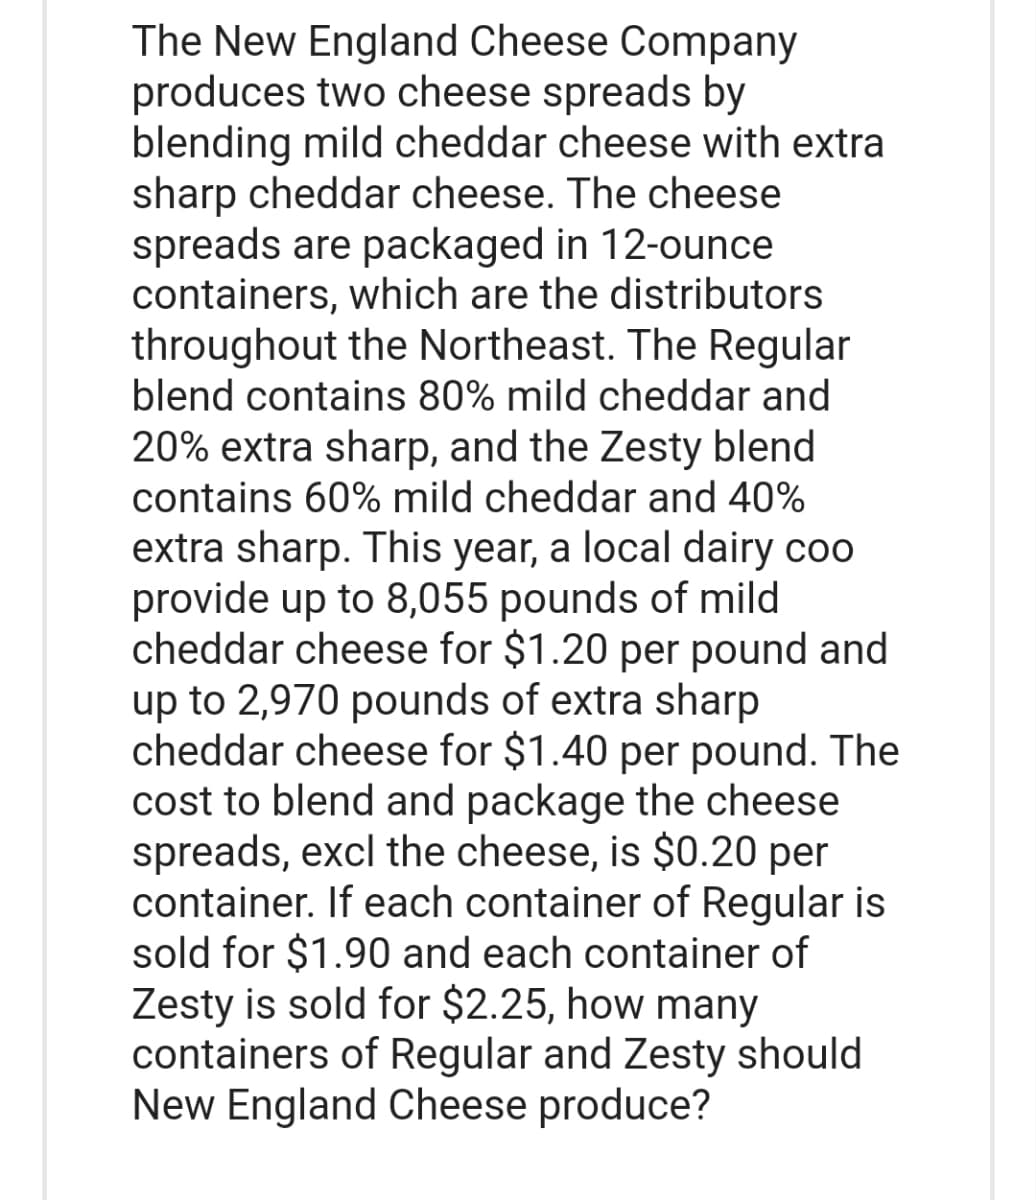 The New England Cheese Company
produces two cheese spreads by
blending mild cheddar cheese with extra
sharp cheddar cheese. The cheese.
spreads are packaged in 12-ounce
containers, which are the distributors
throughout the Northeast. The Regular
blend contains 80% mild cheddar and
20% extra sharp, and the Zesty blend
contains 60% mild cheddar and 40%
extra sharp. This year, a local dairy coo
provide up to 8,055 pounds of mild
cheddar cheese for $1.20 per pound and
up to 2,970 pounds of extra sharp
cheddar cheese for $1.40 per pound. The
cost to blend and package the cheese
spreads, excl the cheese, is $0.20 per
container. If each container of Regular is
sold for $1.90 and each container of
Zesty is sold for $2.25, how many
containers of Regular and Zesty should
New England Cheese produce?